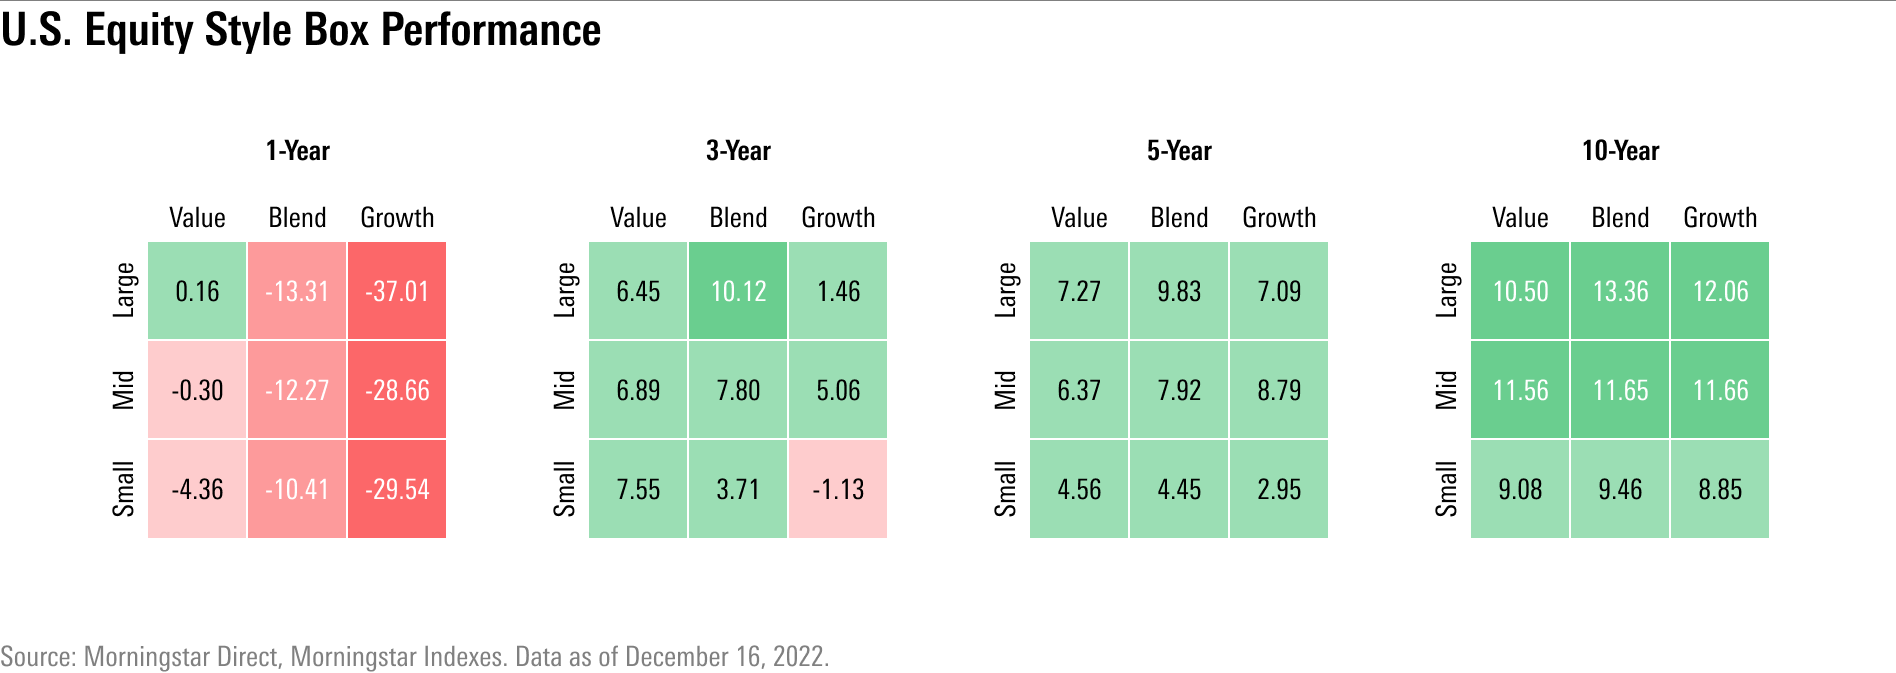 Morningstar equity style box for trailing 1, 3, 5, and 10-year periods.